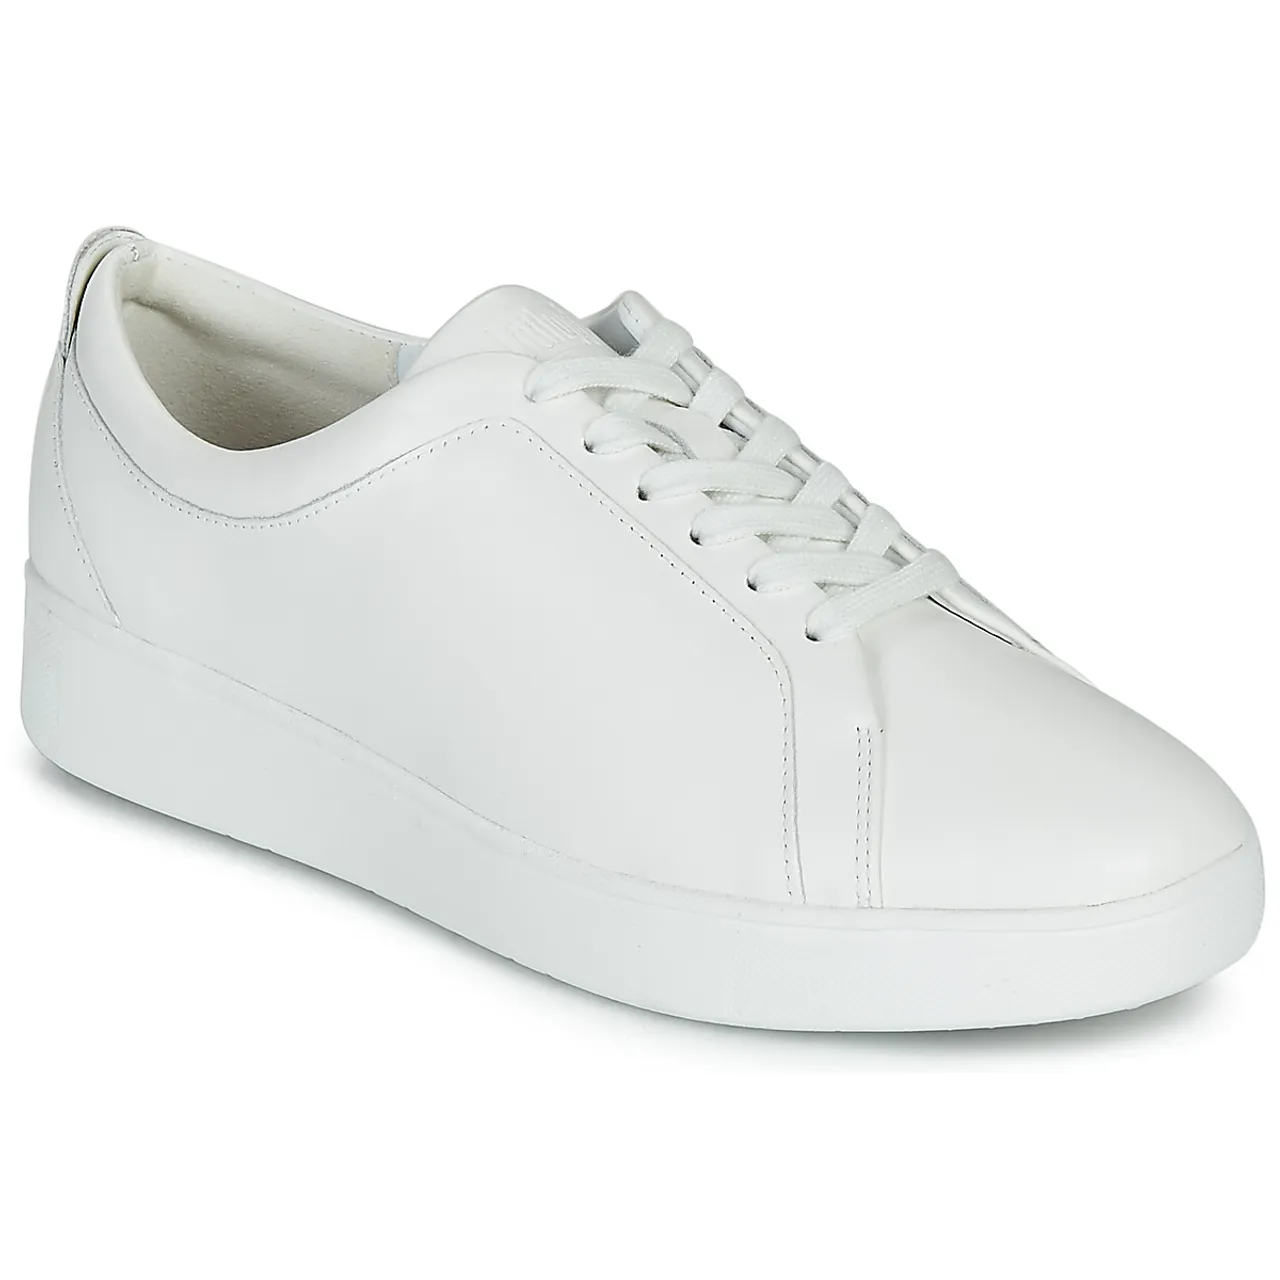 FitFlop  RALLY SNEAKERS  women's Shoes (Trainers) in White